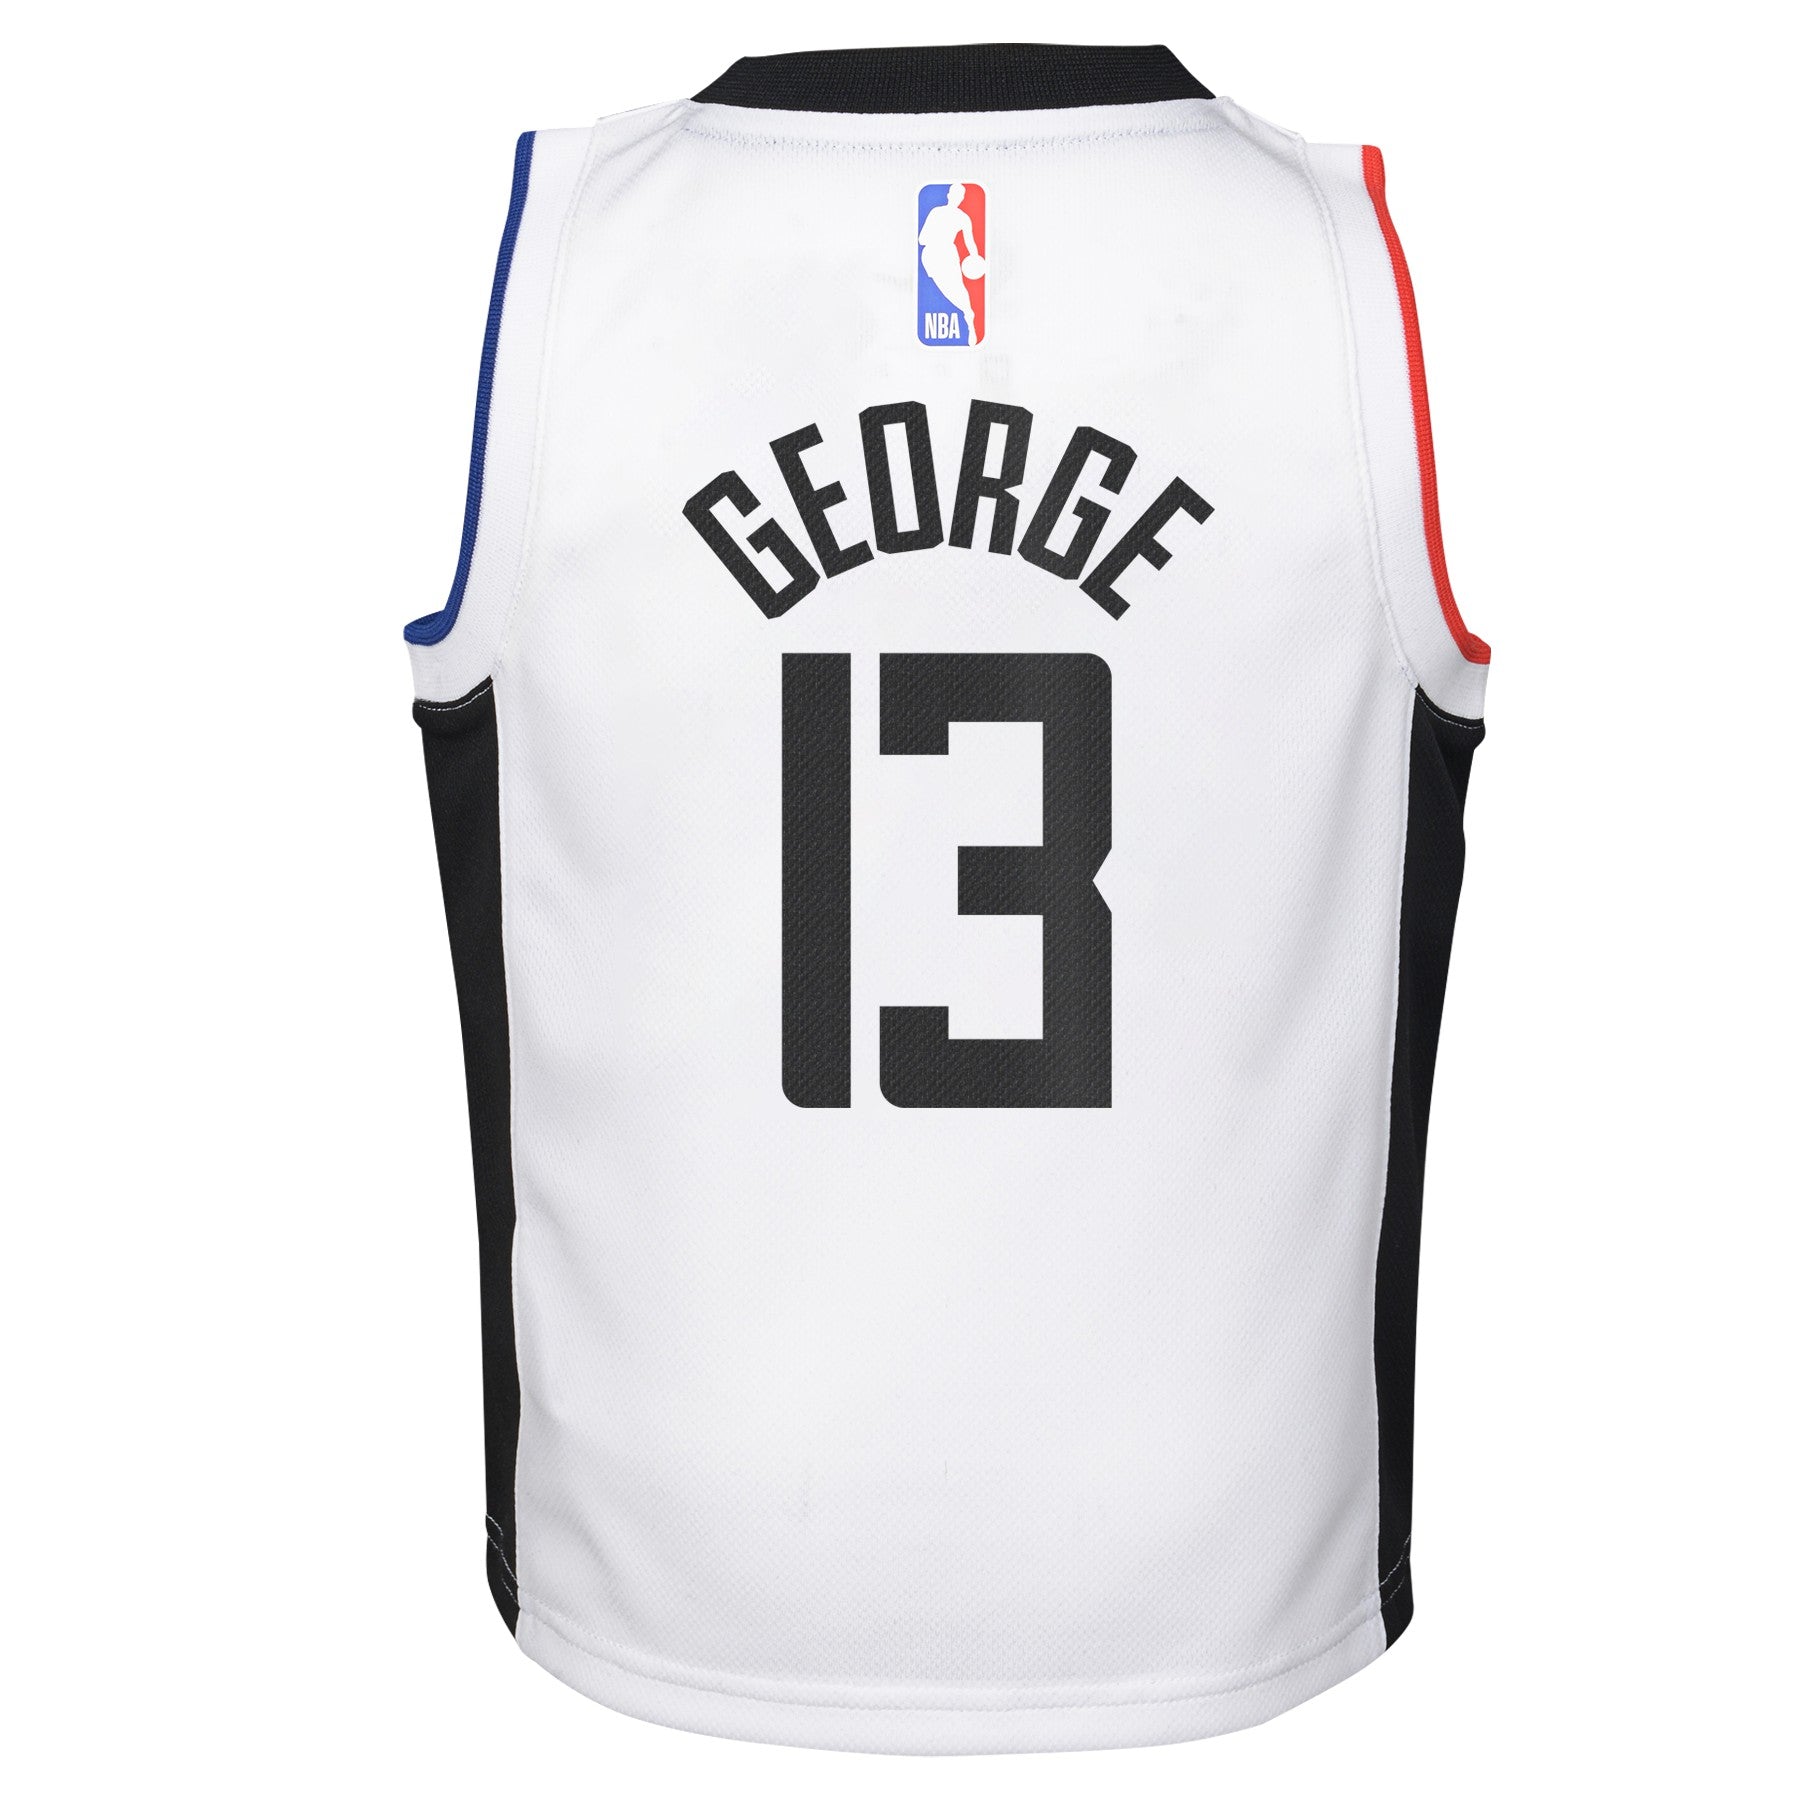 Nike NBA Kids (4-7) Los Angeles Clippers Paul George #13 City Edition –  Fanletic